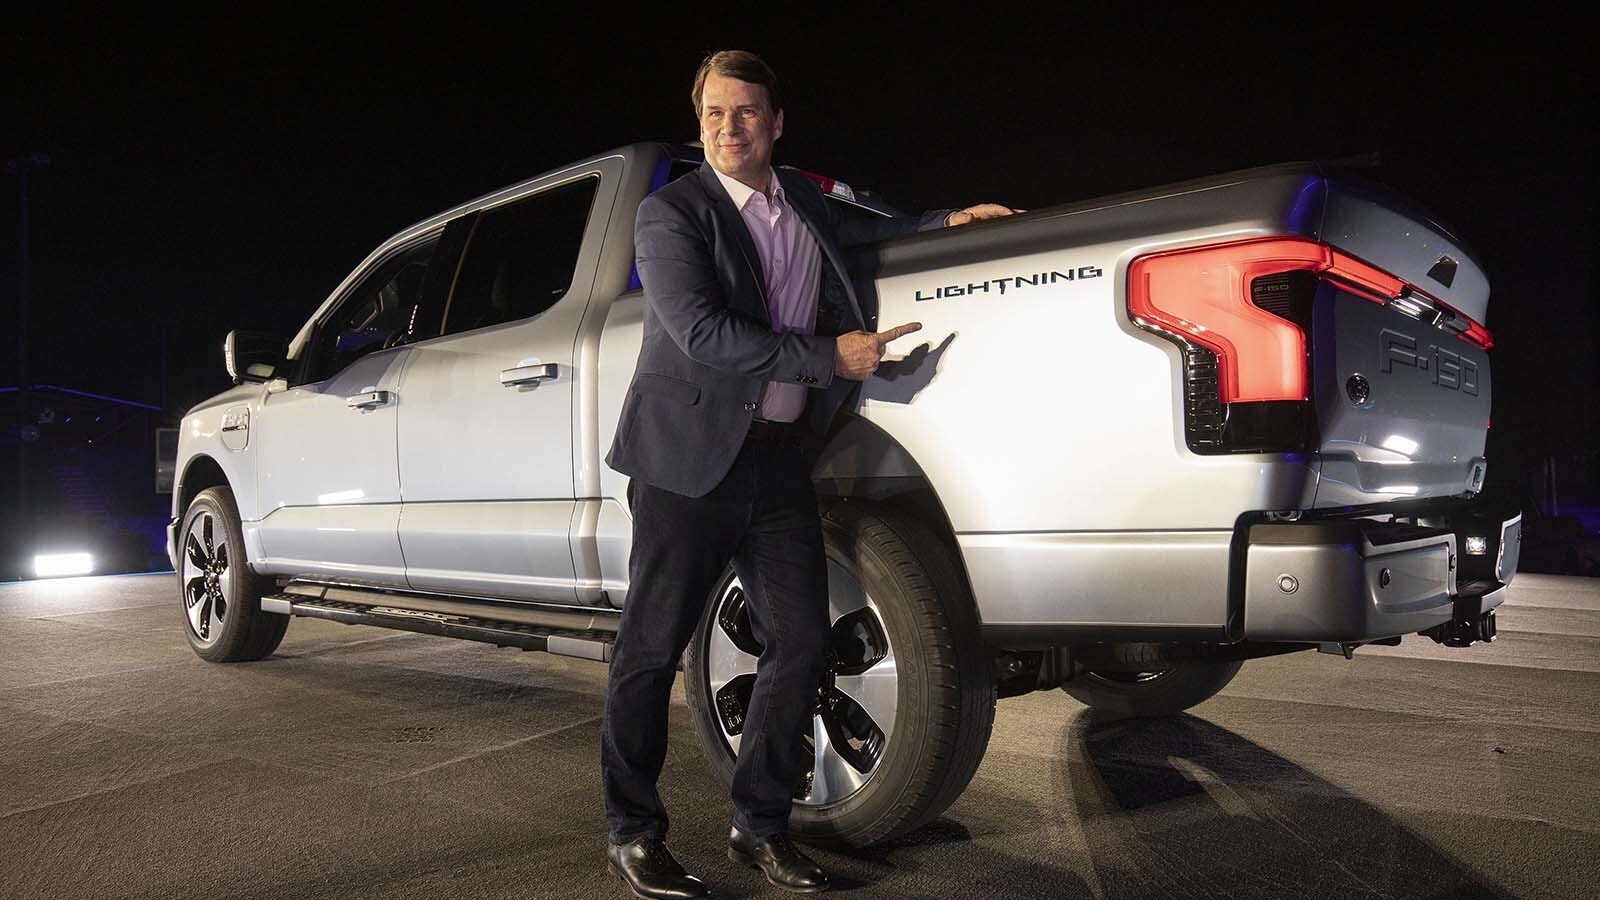 Ford CEO Jim Farley poses with one of his company's electric F-150 Lightning trucks. He said he was surprised recently when driving a Lightning himself how long it takes to charge it.